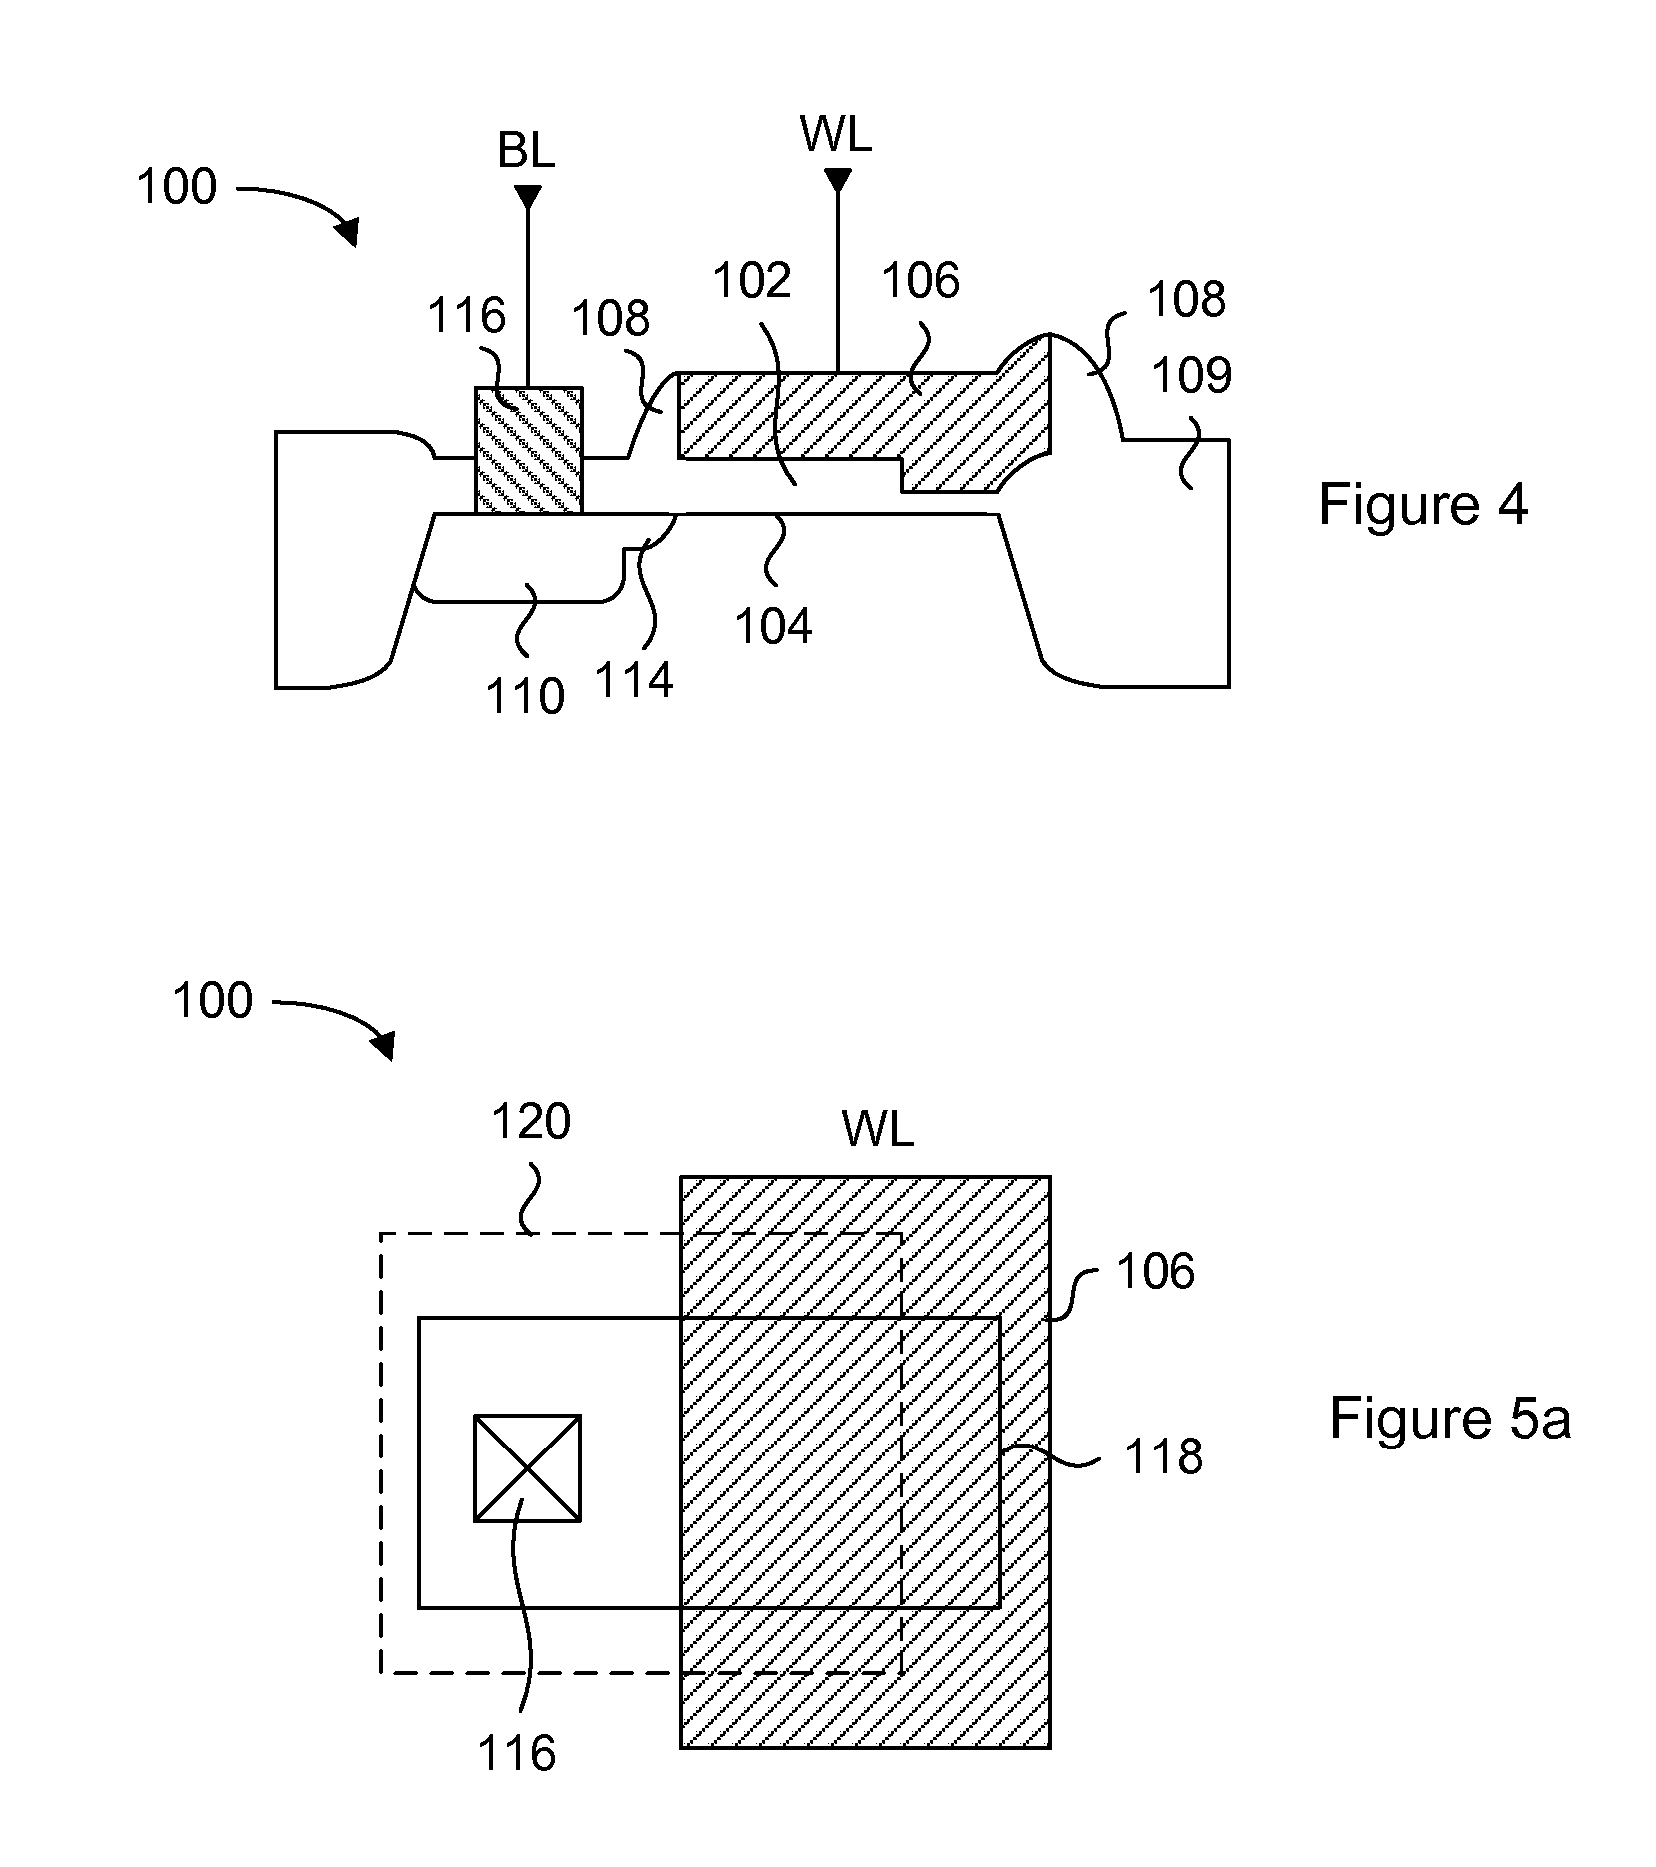 Anti-fuse memory cell